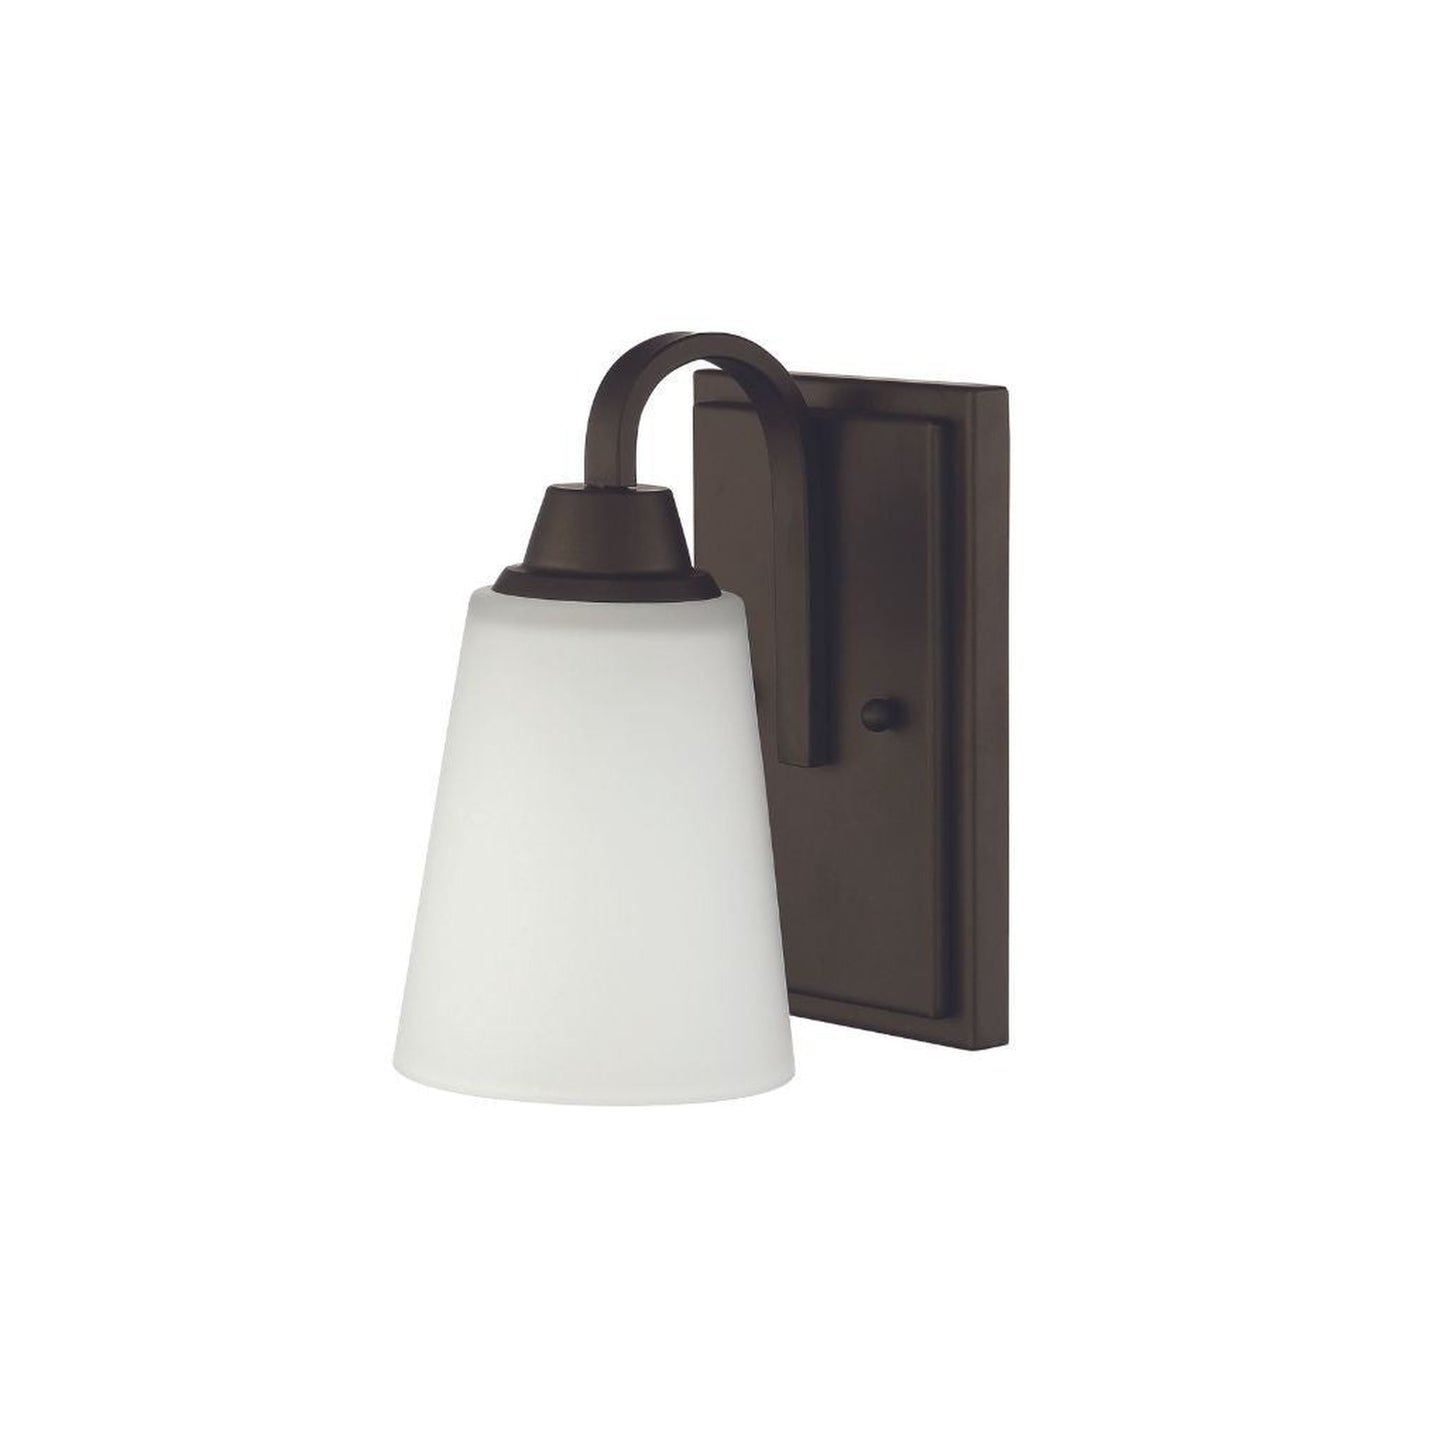 Craftmade Grace 5" x 9" 1-Light Espresso Wall Sconce With White Frosted Glass Shade